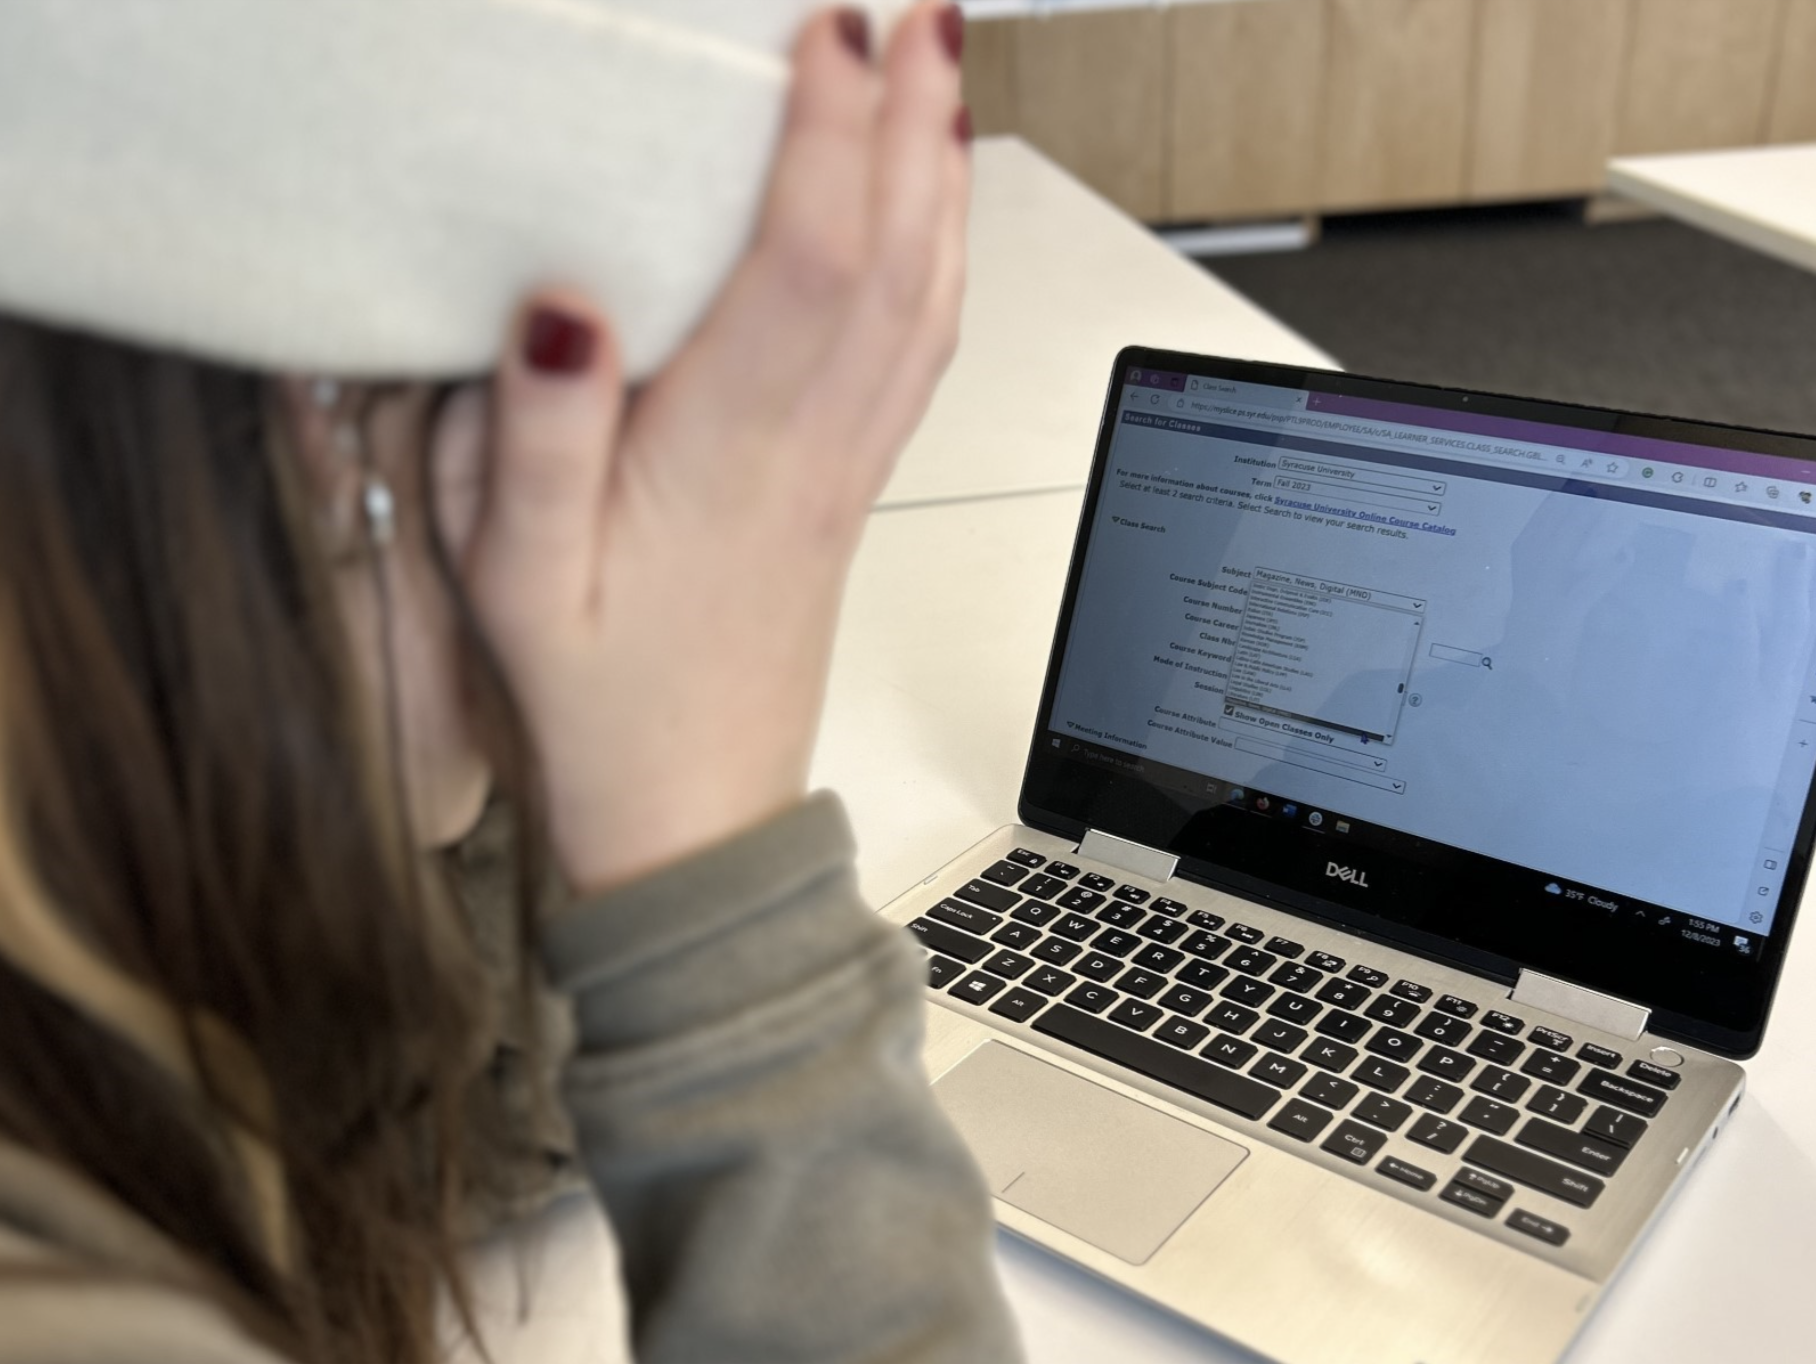 a person with their head in their hands looks at a computer screen